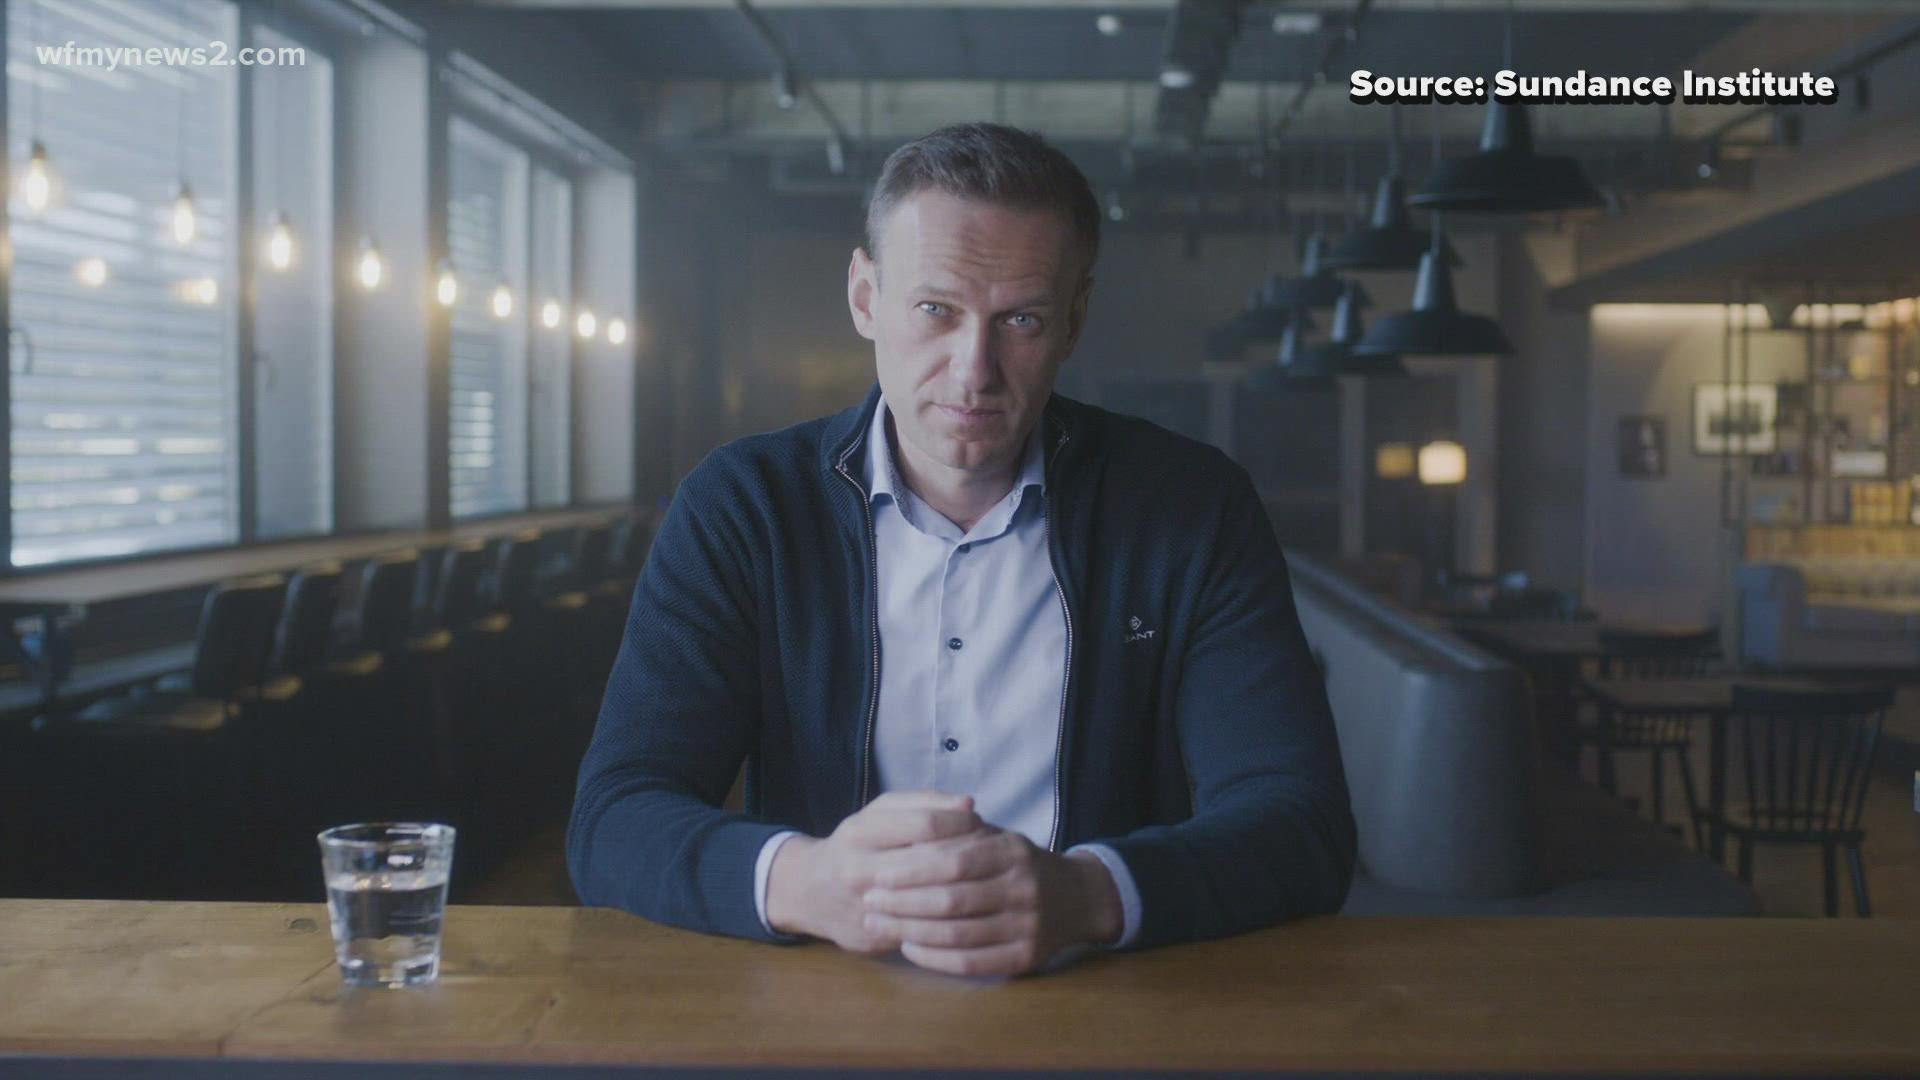 “Navalny” follows a Russian political activist who was nearly poisoned by Russia’s Federal Security Service.